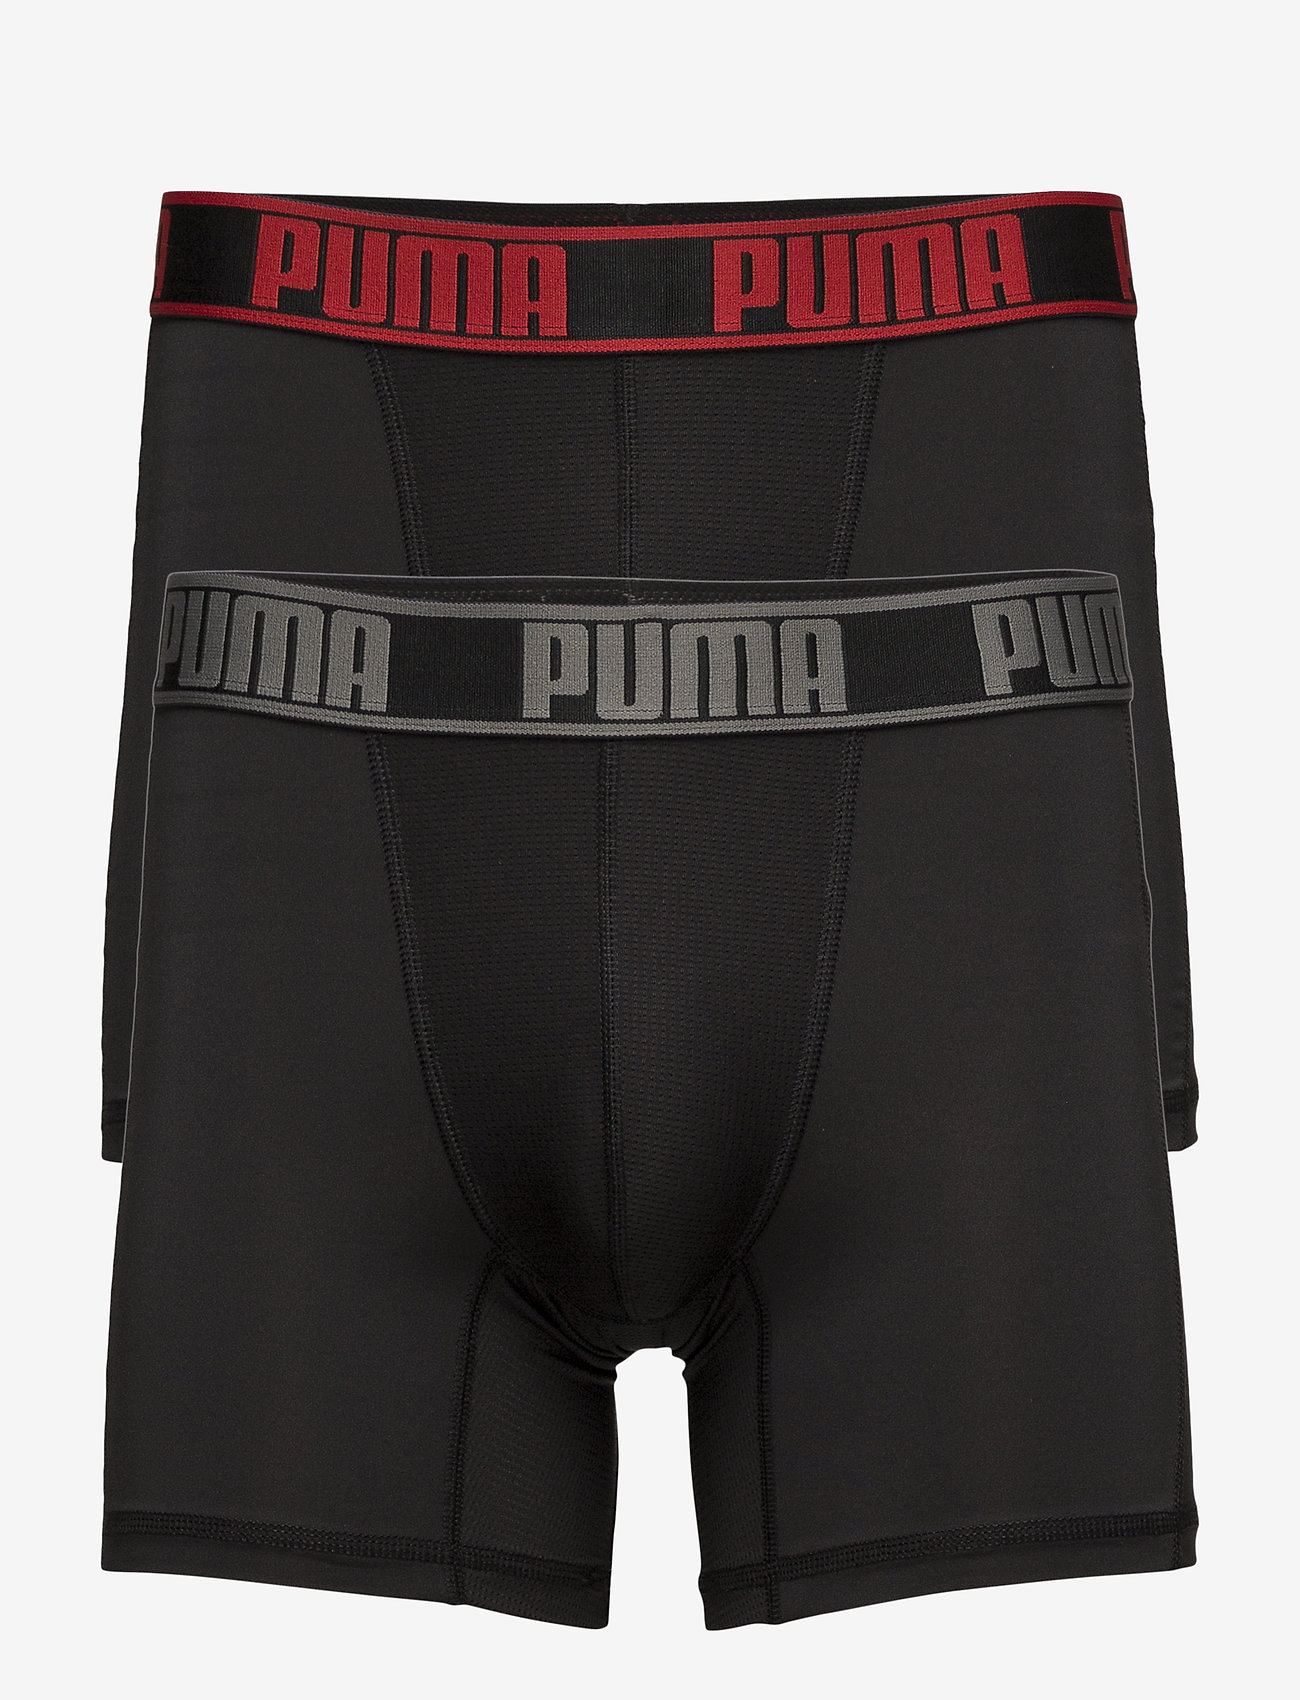 Puma Active Boxer 2p Packed (Black/red 